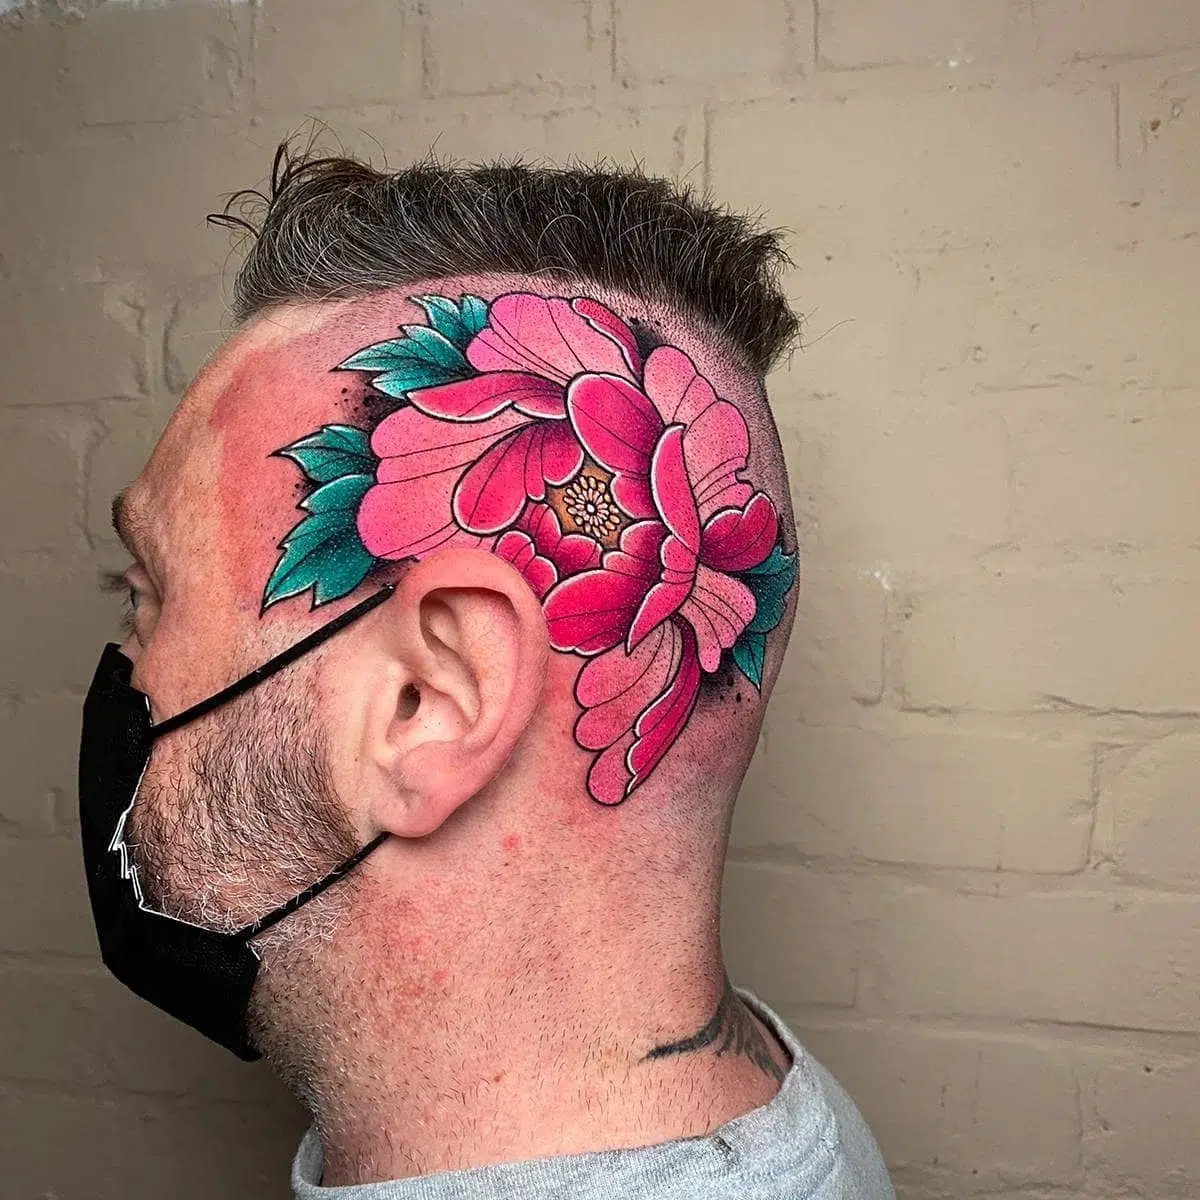 A peony on the napper for Rossco rosscotattoos always a pleasure tattooing fellow tattoo artists. Stunning work as always by Noemi noemi_tattoo always up for different styles- she's not a one trick peony 🥁

                 